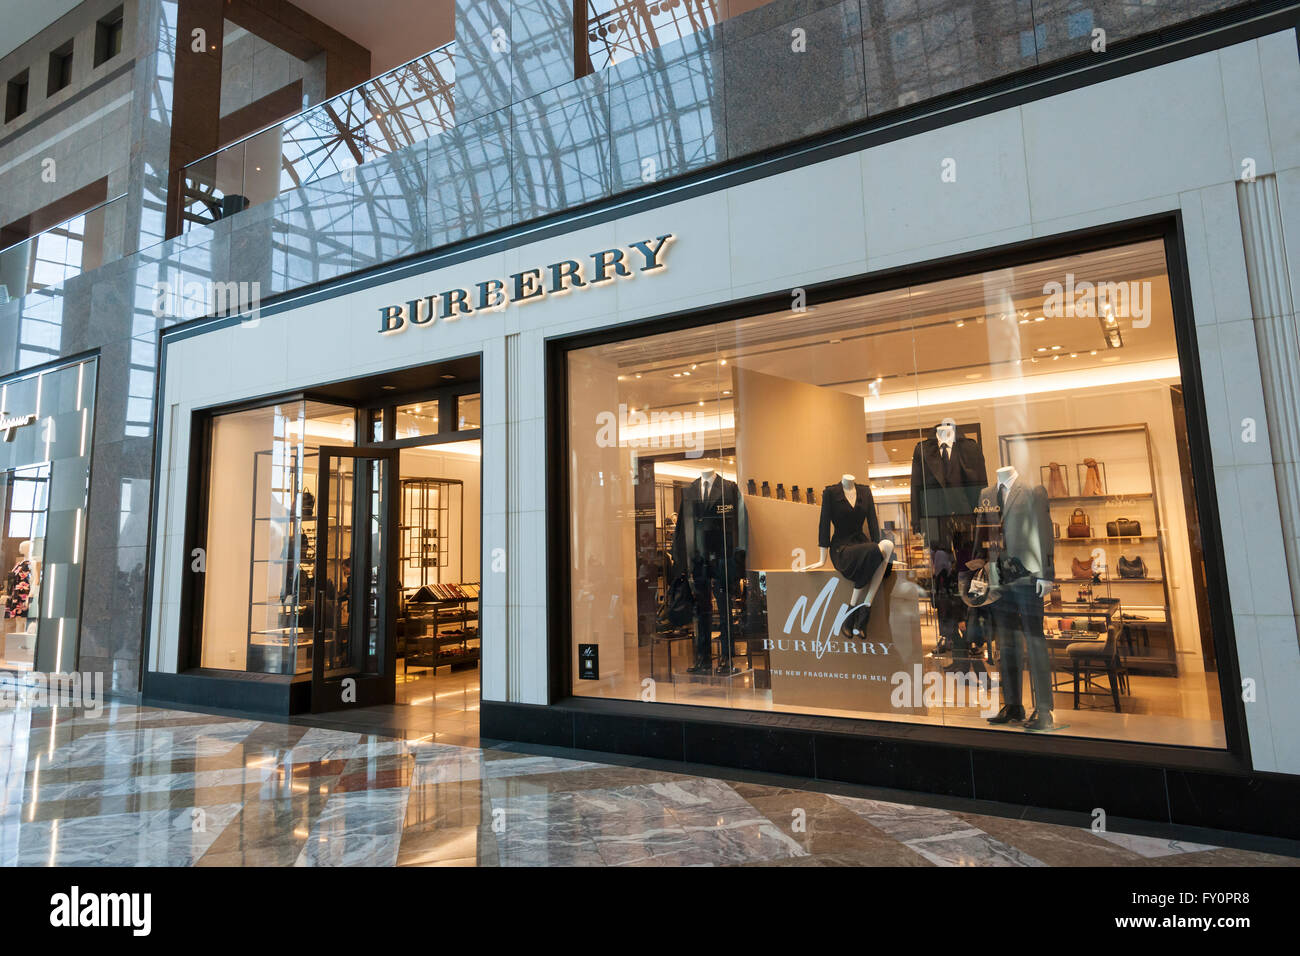 AJh,the mall outlet burberry,hrdsindia.org